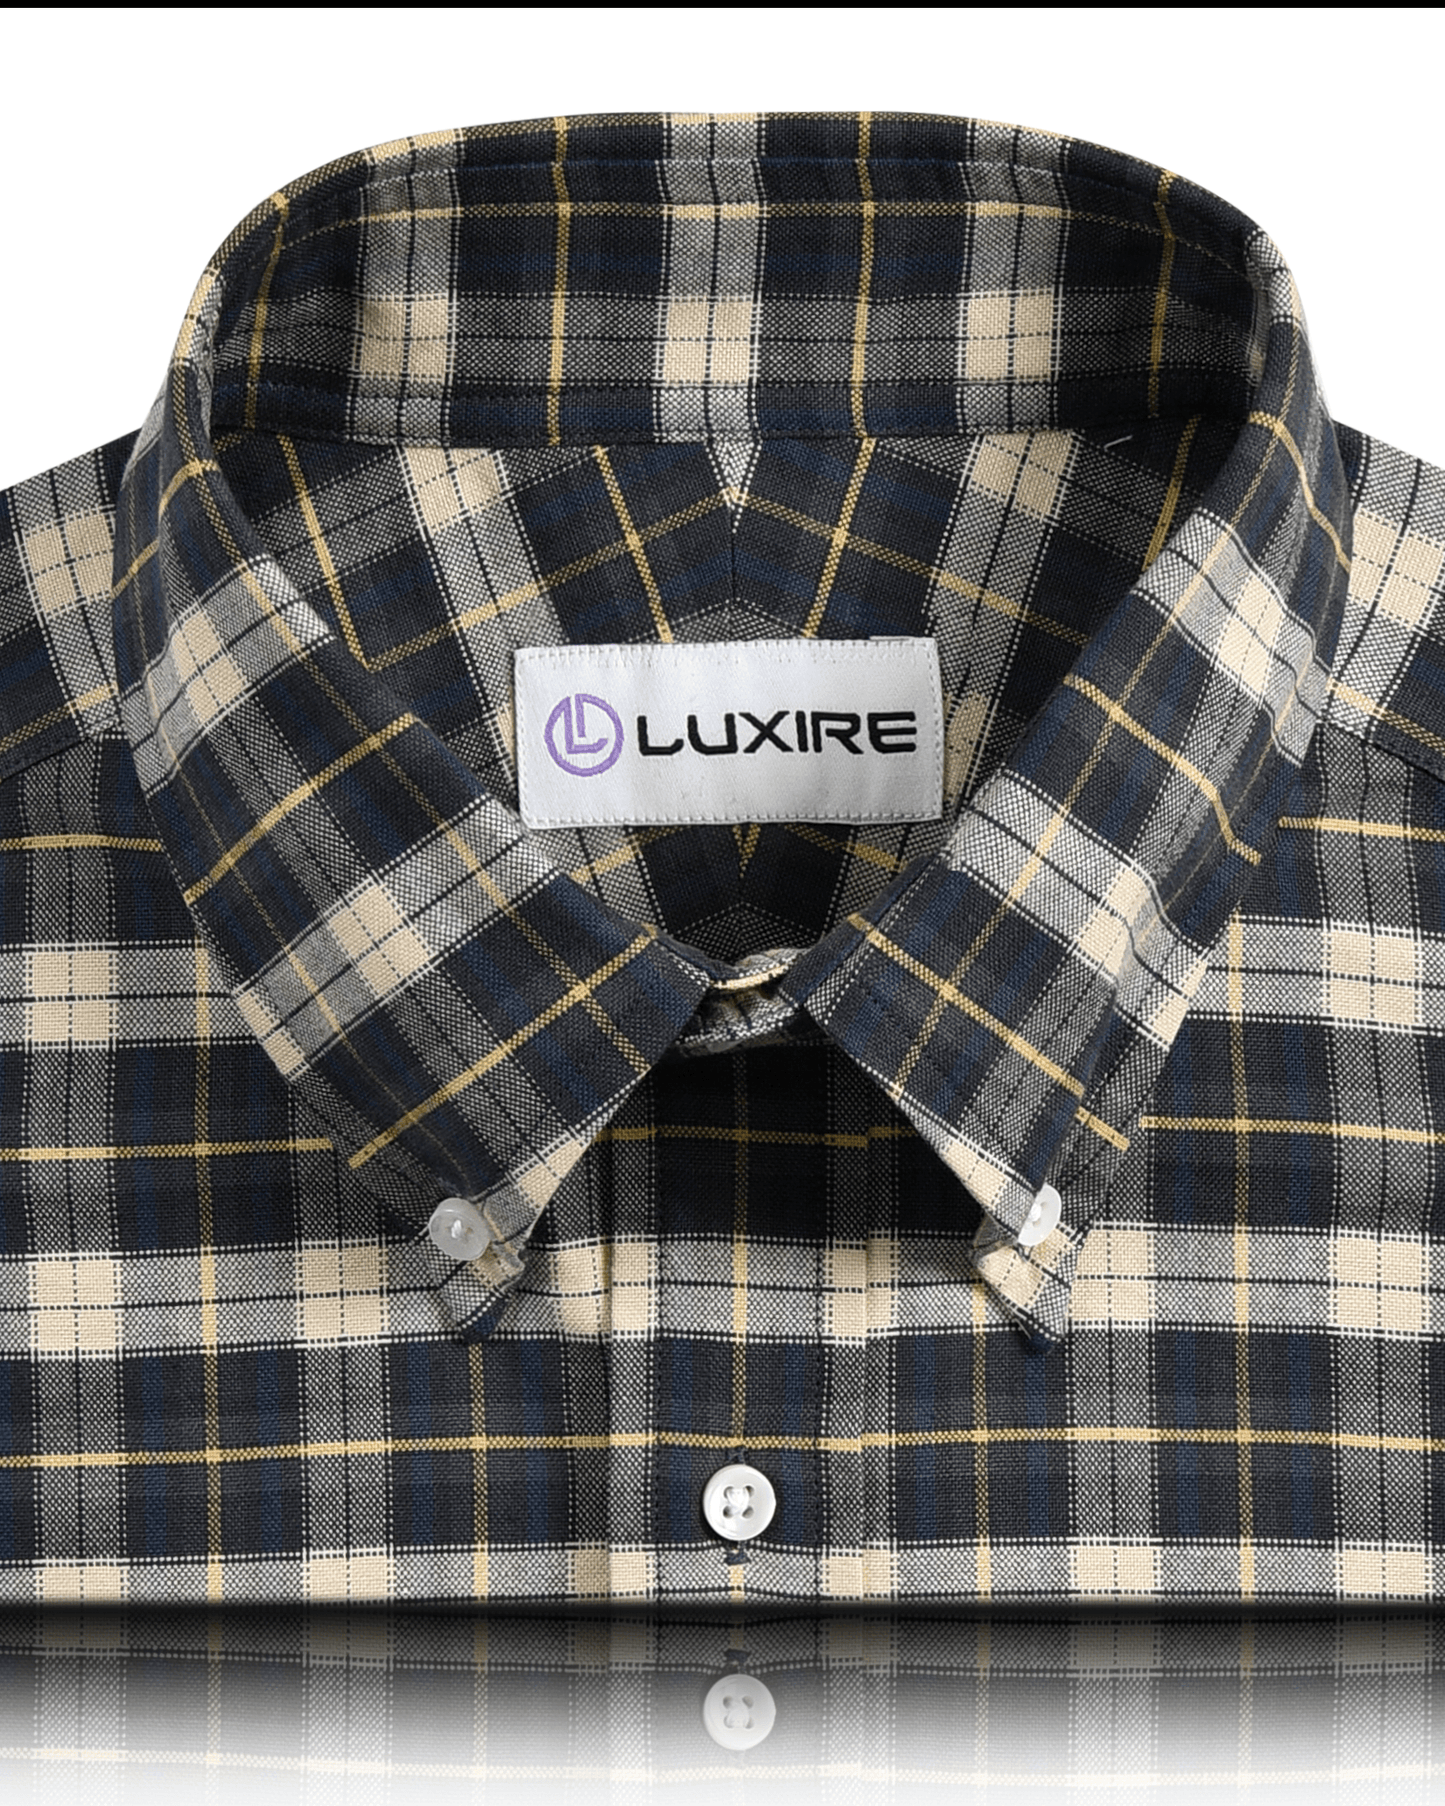 Front close view of custom check shirts for men by Luxire green navy and cream